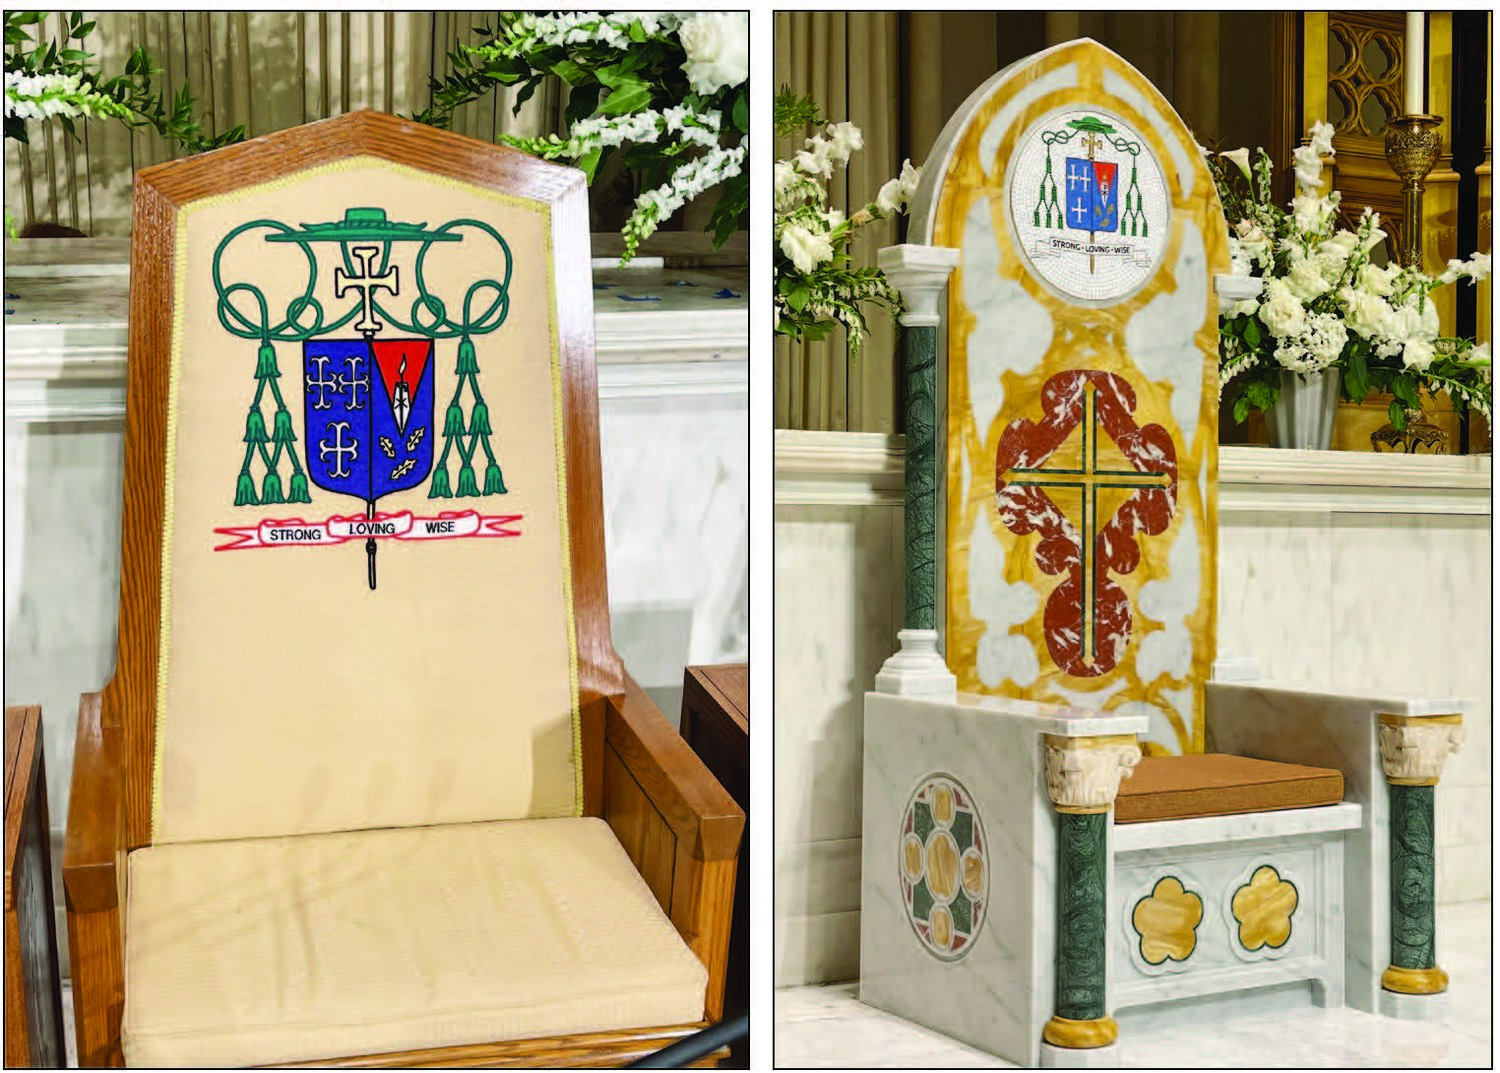 At left, the former cathedra installed at the Cathedral of SS. Peter and Paul in 1972. At right is the new Italian marble cathedra installed on June 9 that will be blessed and first used this Sunday during the 10 a.m. Mass.